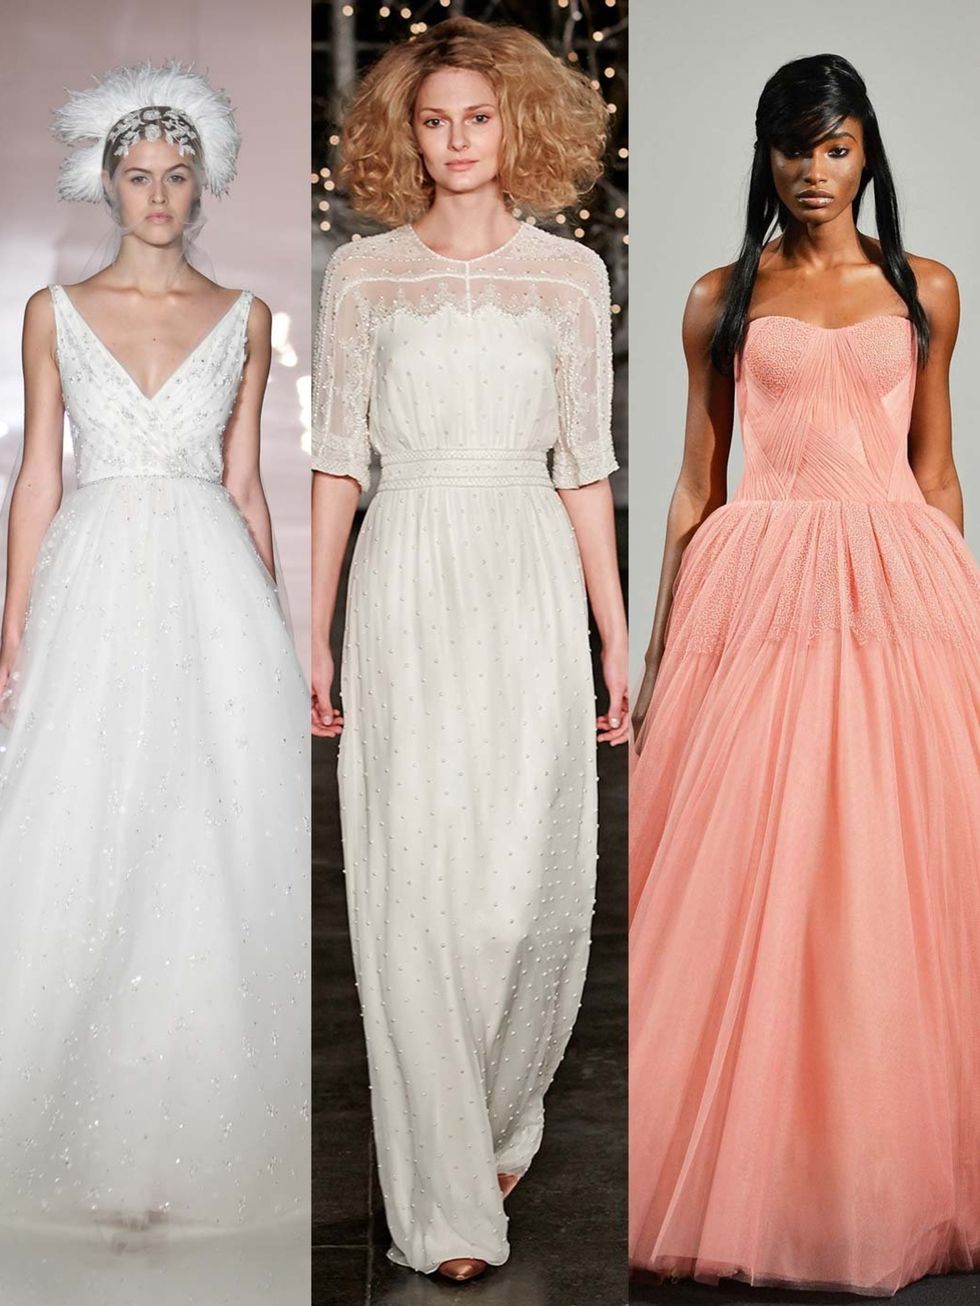 <p>Beatific offerings of tulle and lace, sweeping, statement ballgowns and simple, luxurious silk: <a href="http://www.elleuk.com/style/occasions/elle-weddings">brides</a>,  future or fantasy should look to New York bridal market for inspiration.</p><p>Th